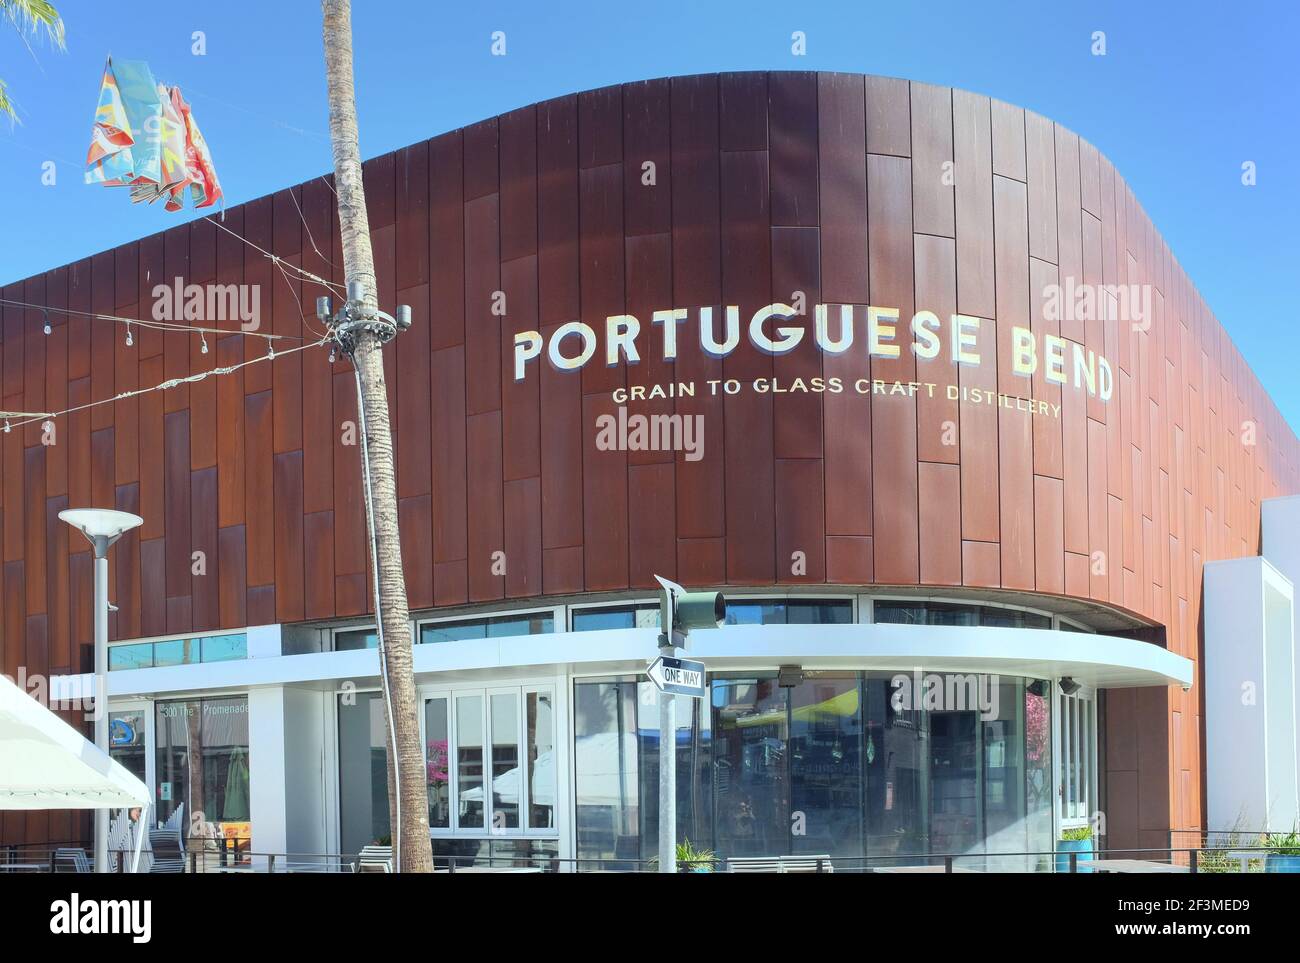 LONG BEACH, CALIFORNIA - 16 MAR 2021: Portuguese Bend Disillery a trendy craft bar and restaurant in the downtown area. Stock Photo